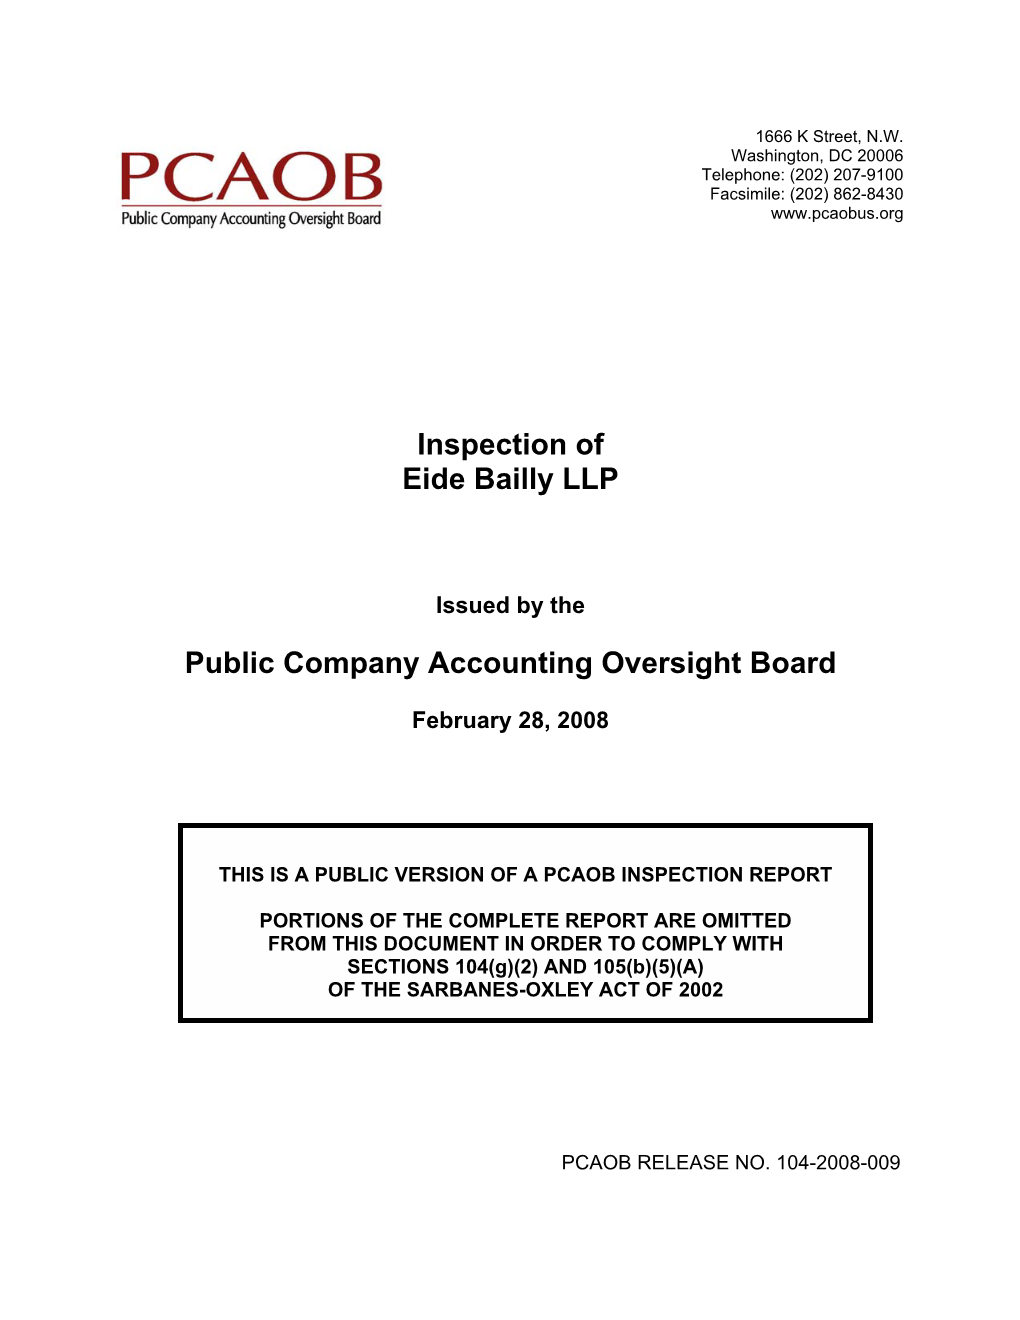 PCAOB Inspection Report of Eide Bailly